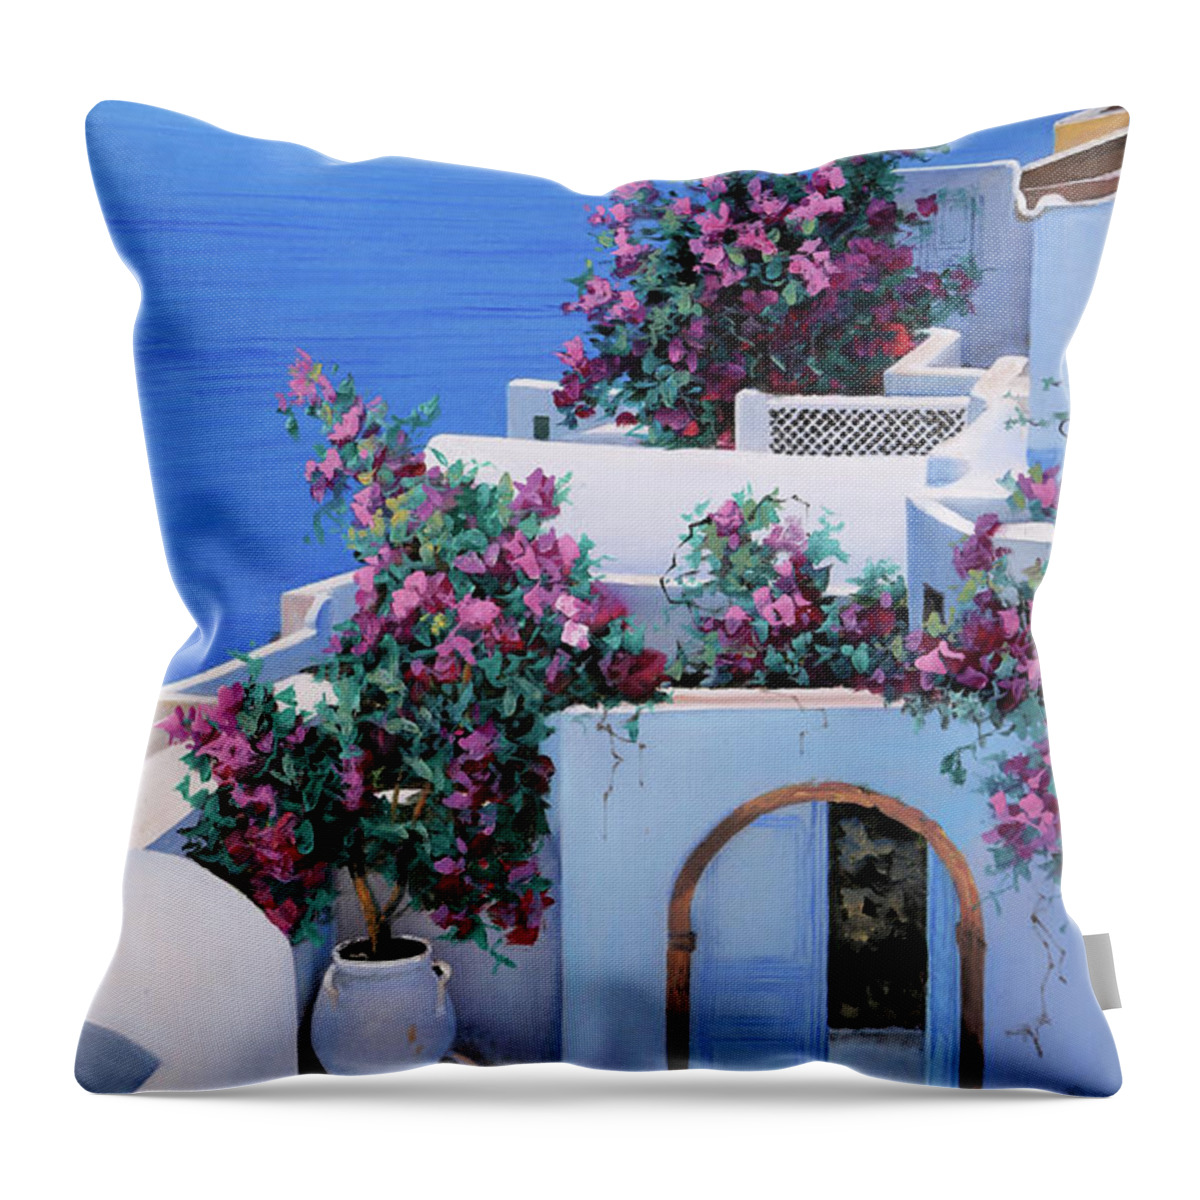 Greecescape Throw Pillow featuring the painting Blu Di Grecia by Guido Borelli